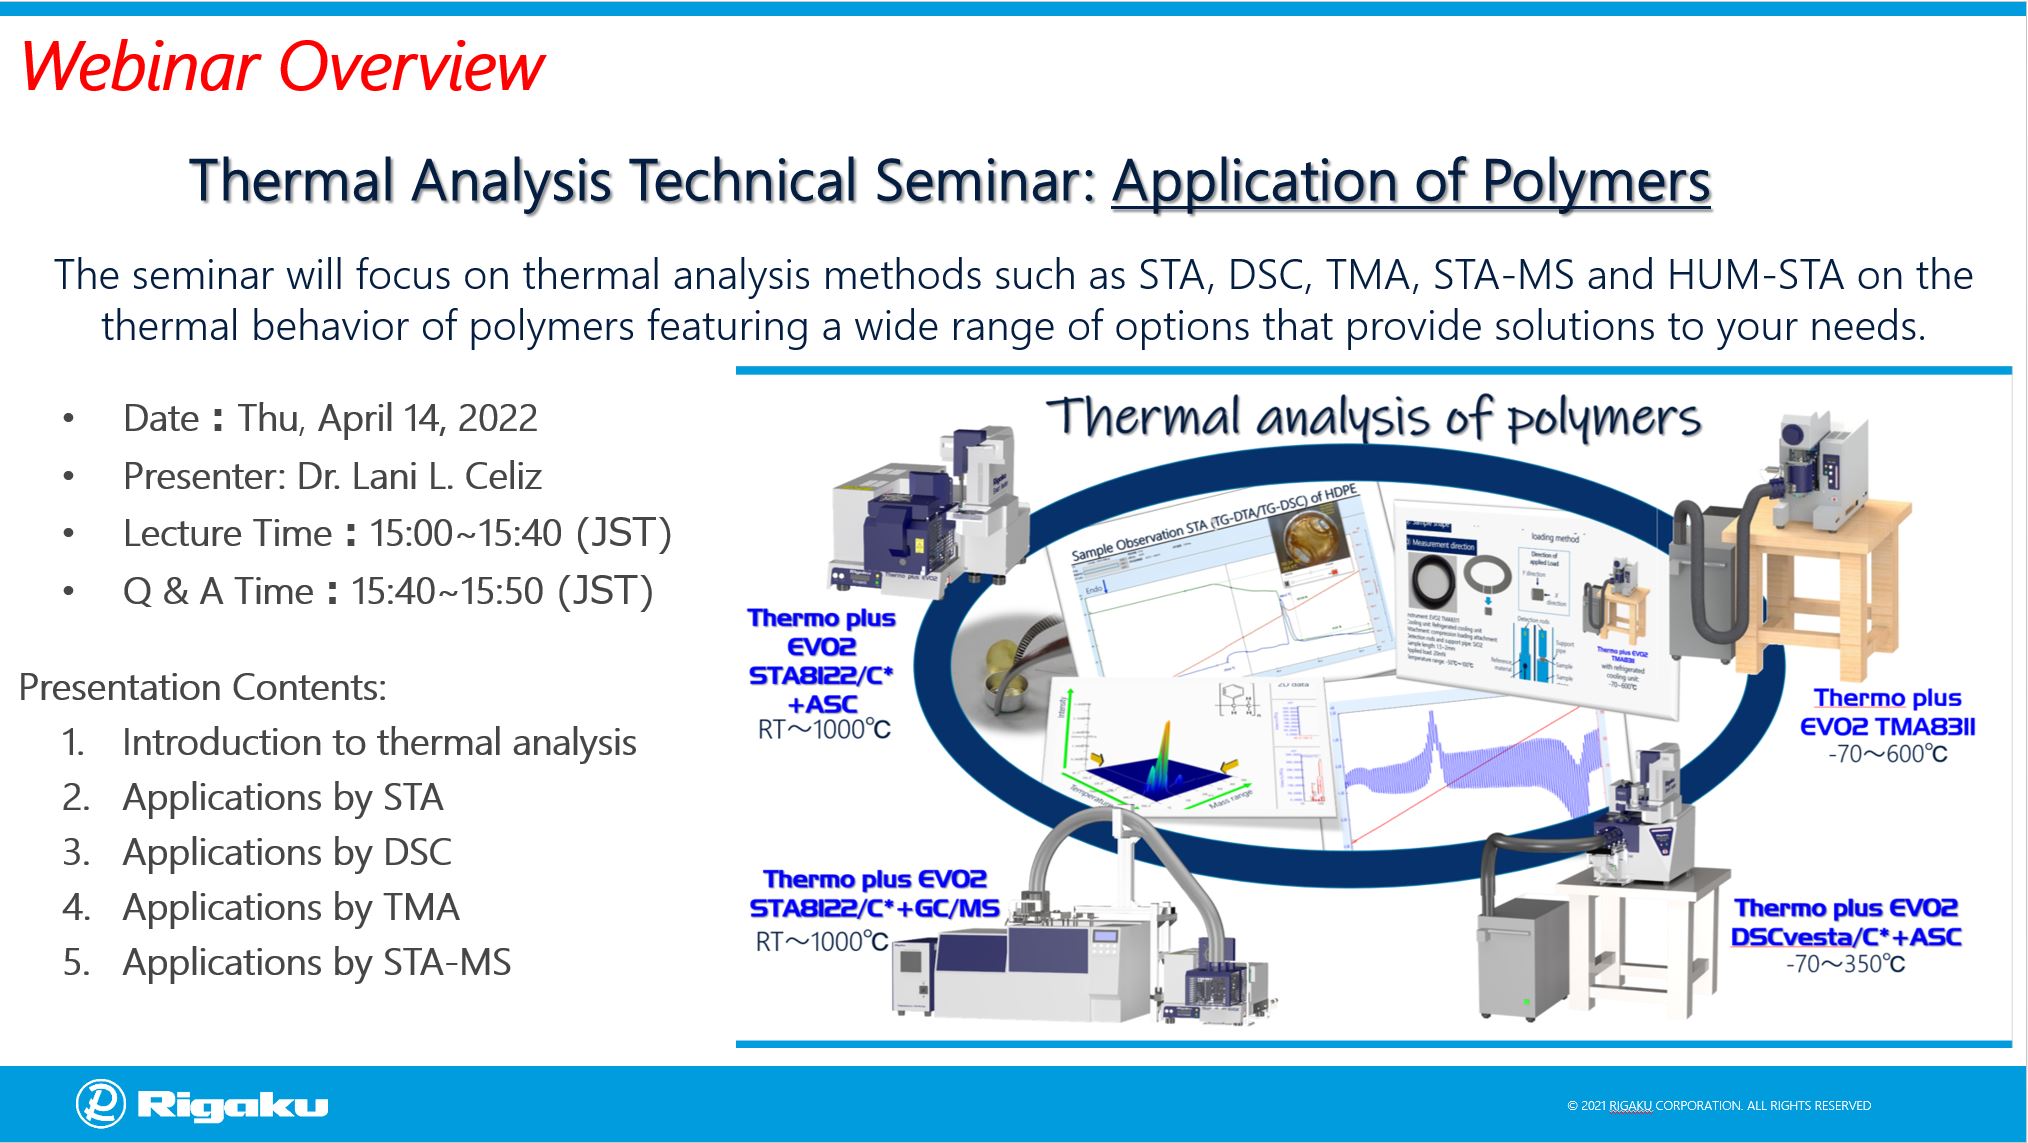 Thermal Analysis Technical Seminar: Application of Polymers